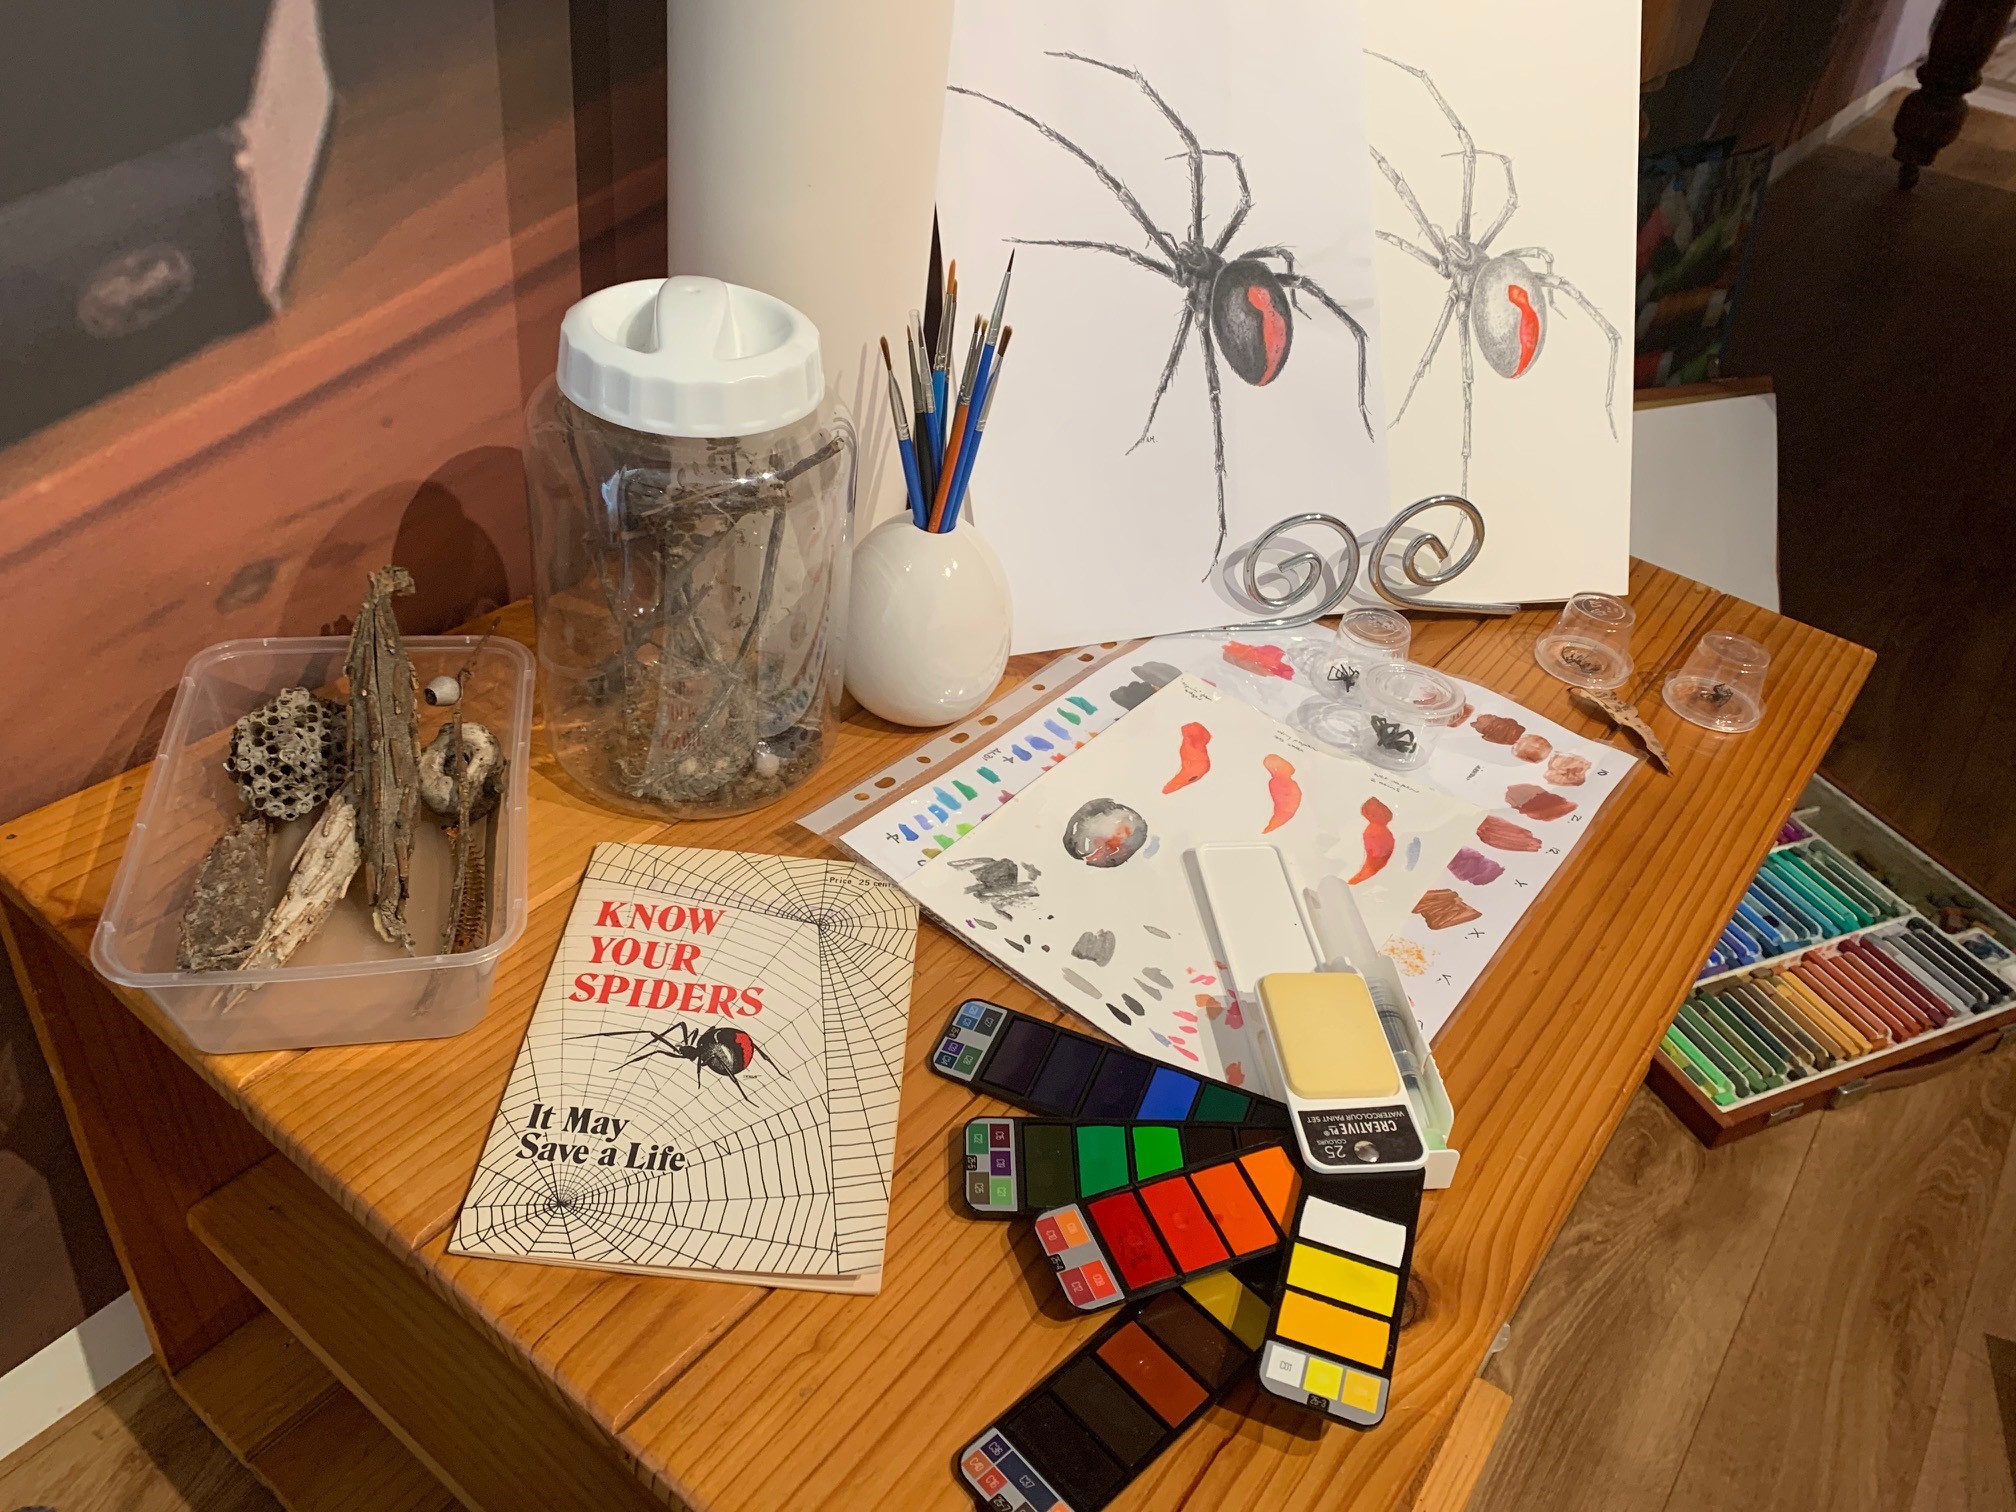 table with sketch of a redback spider